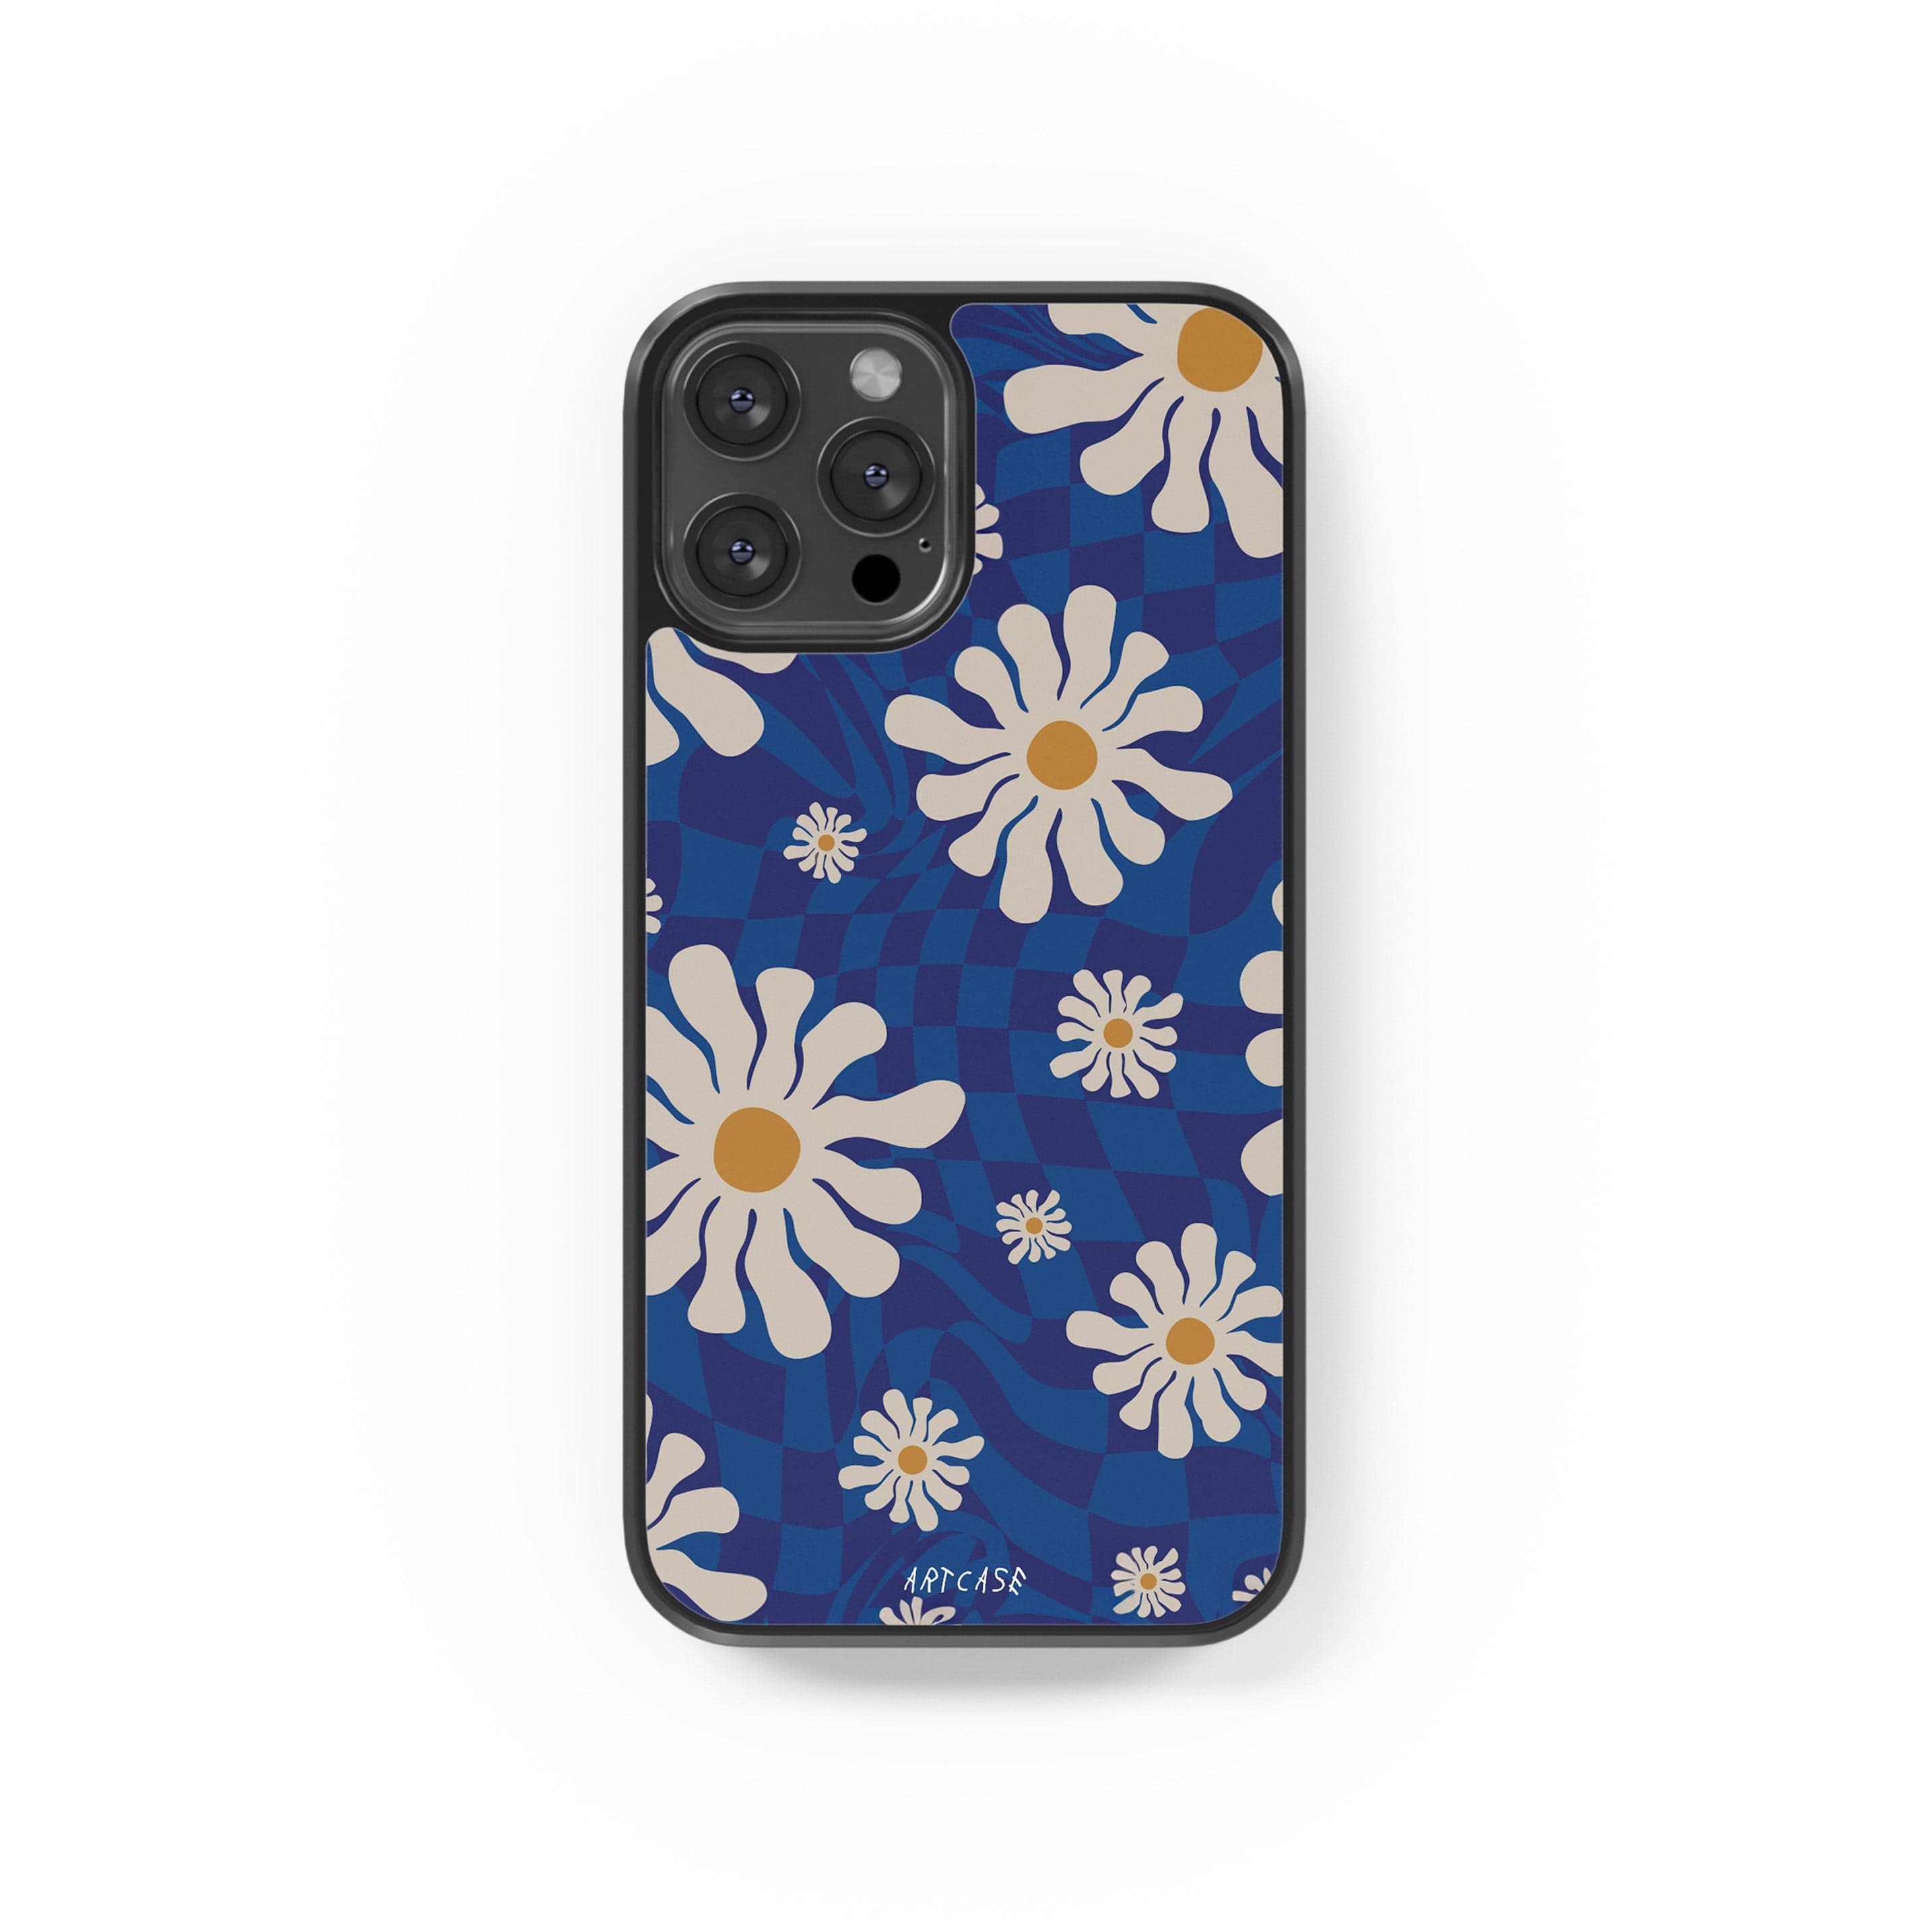 Phone case "Abstract sunflowers"